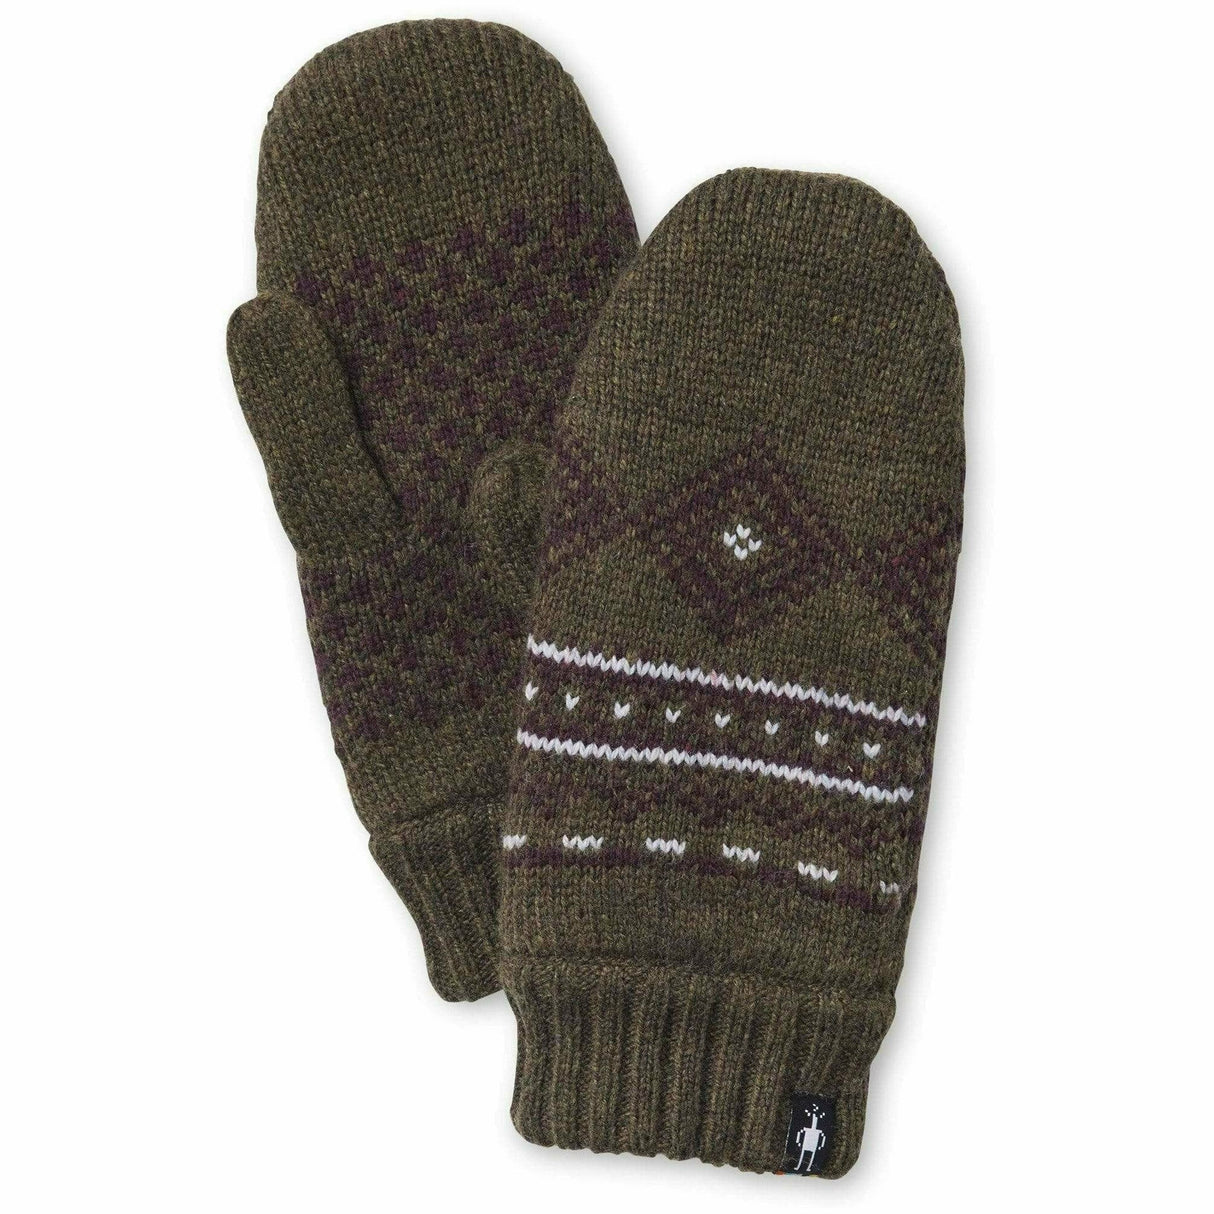 Smartwool Hudson Trail Nordic Mittens  -  One Size Fits Most / Military Olive